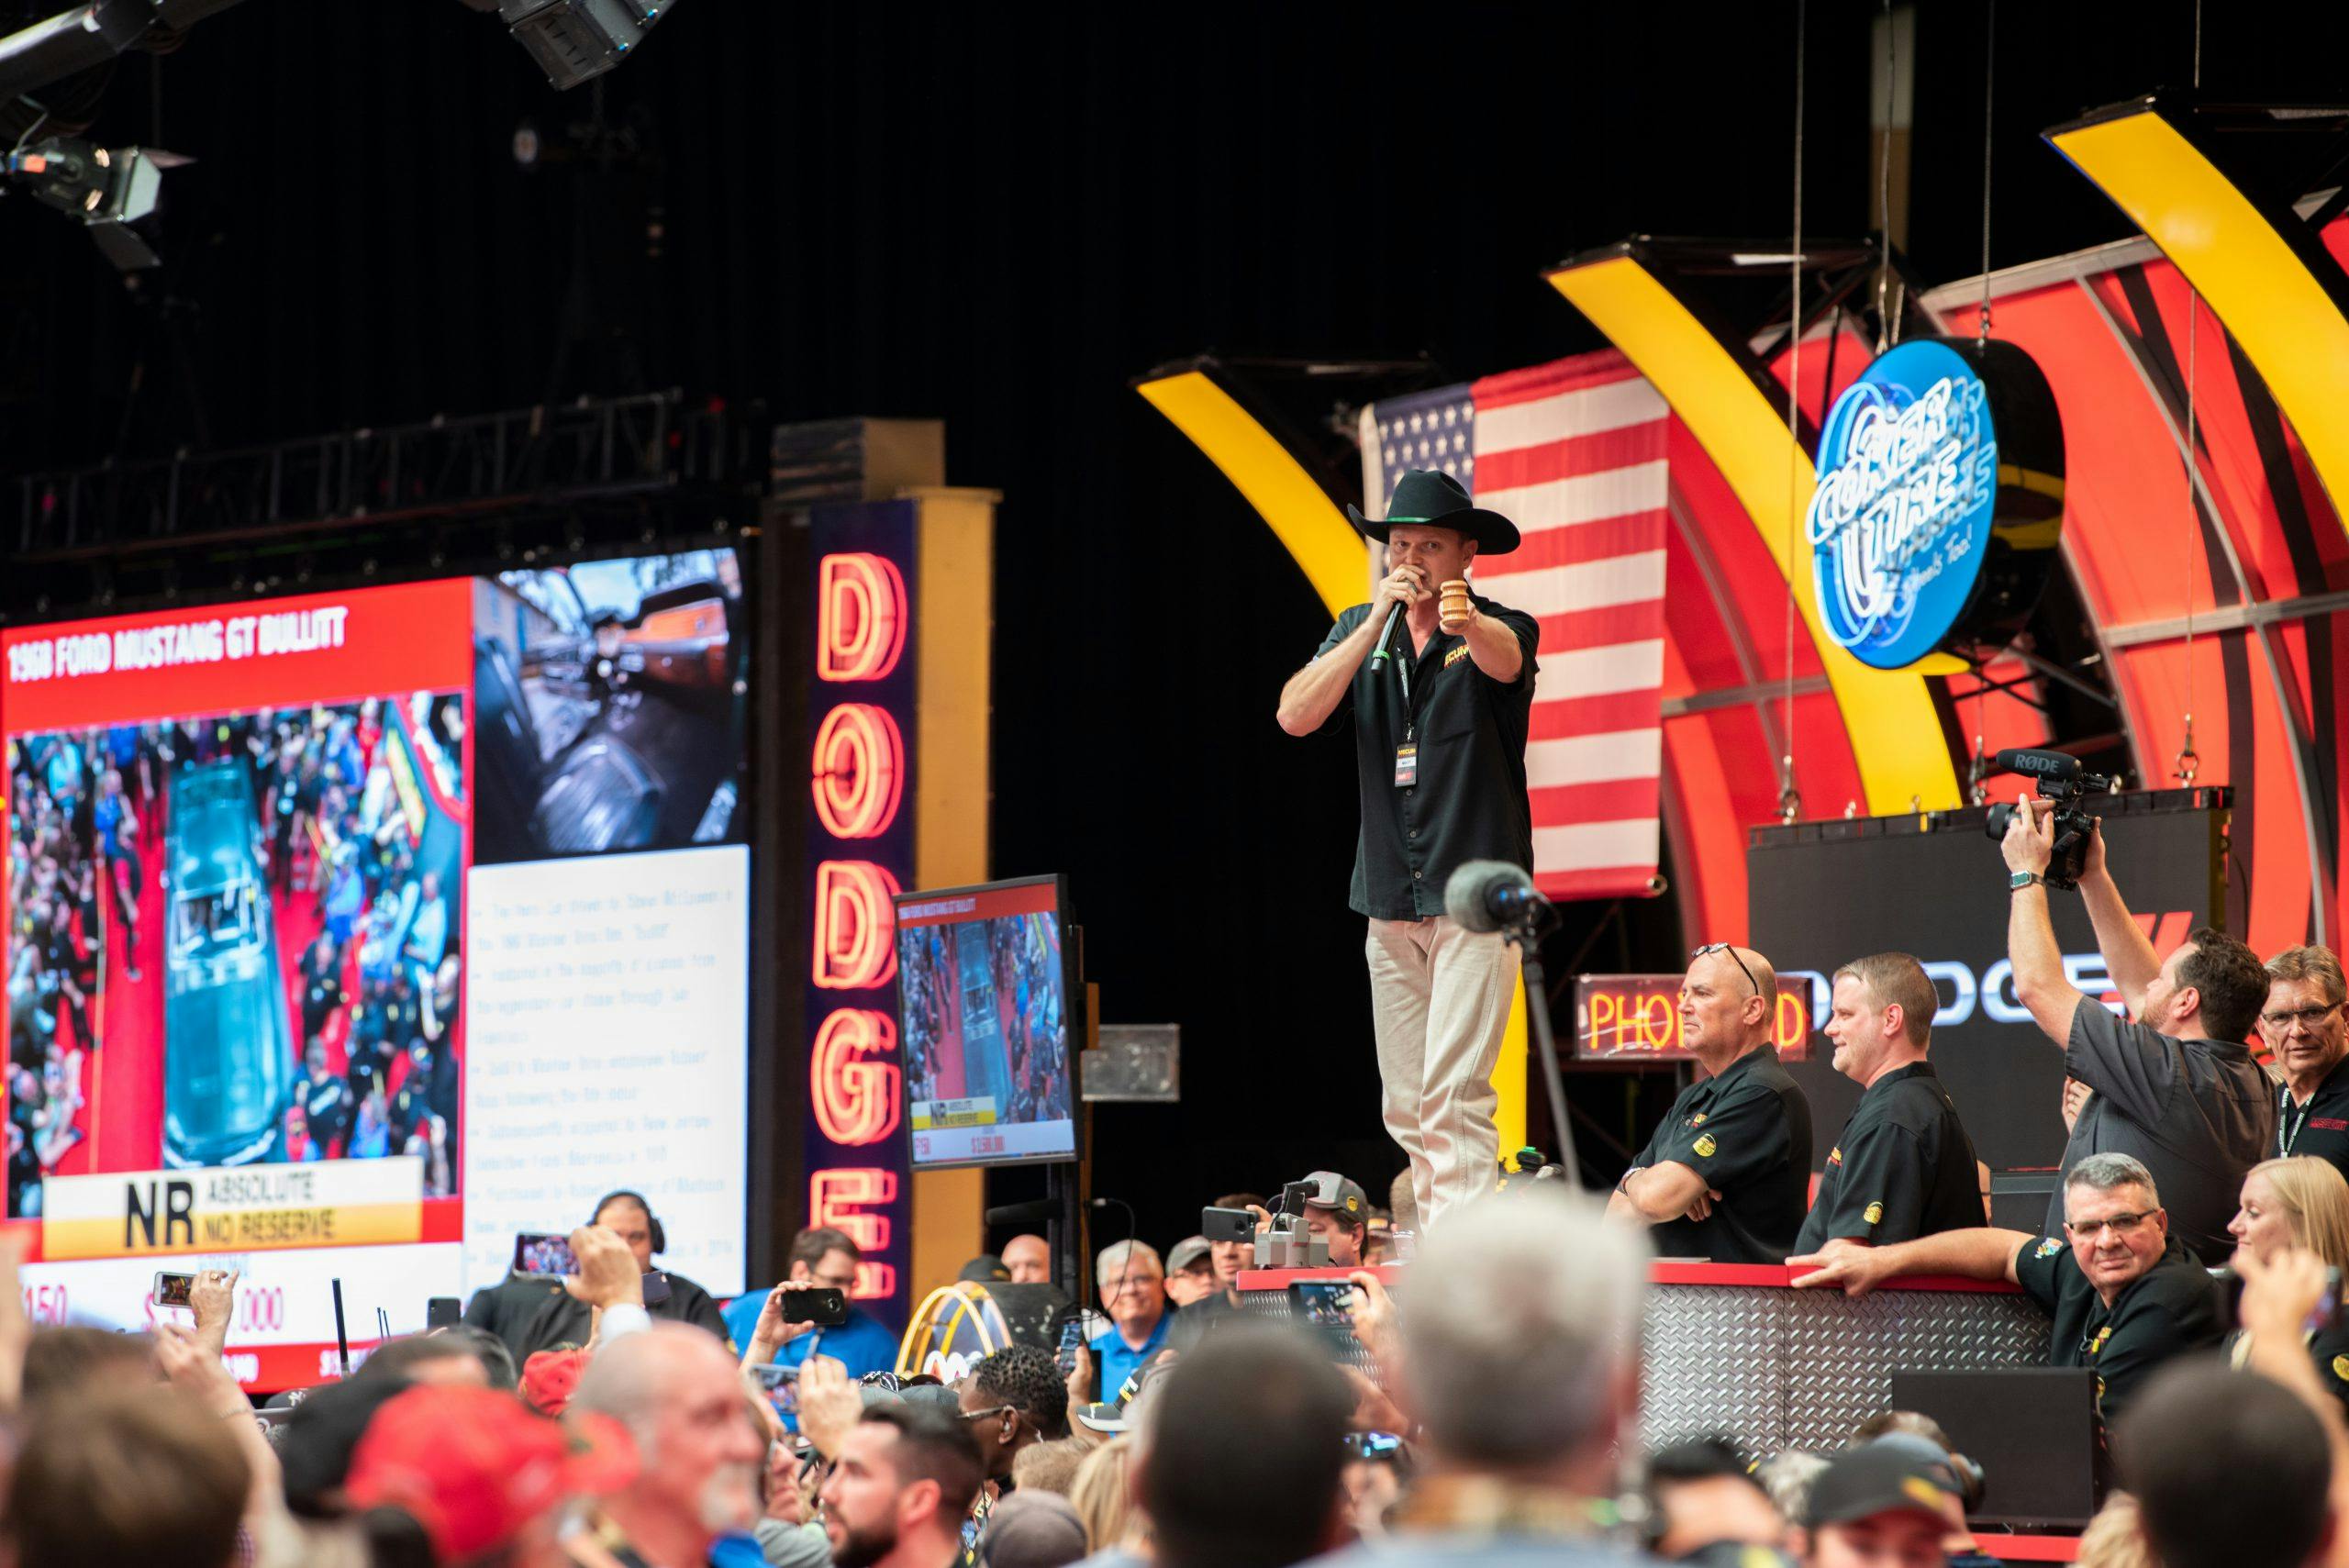 Mecum auctioneer on stage action